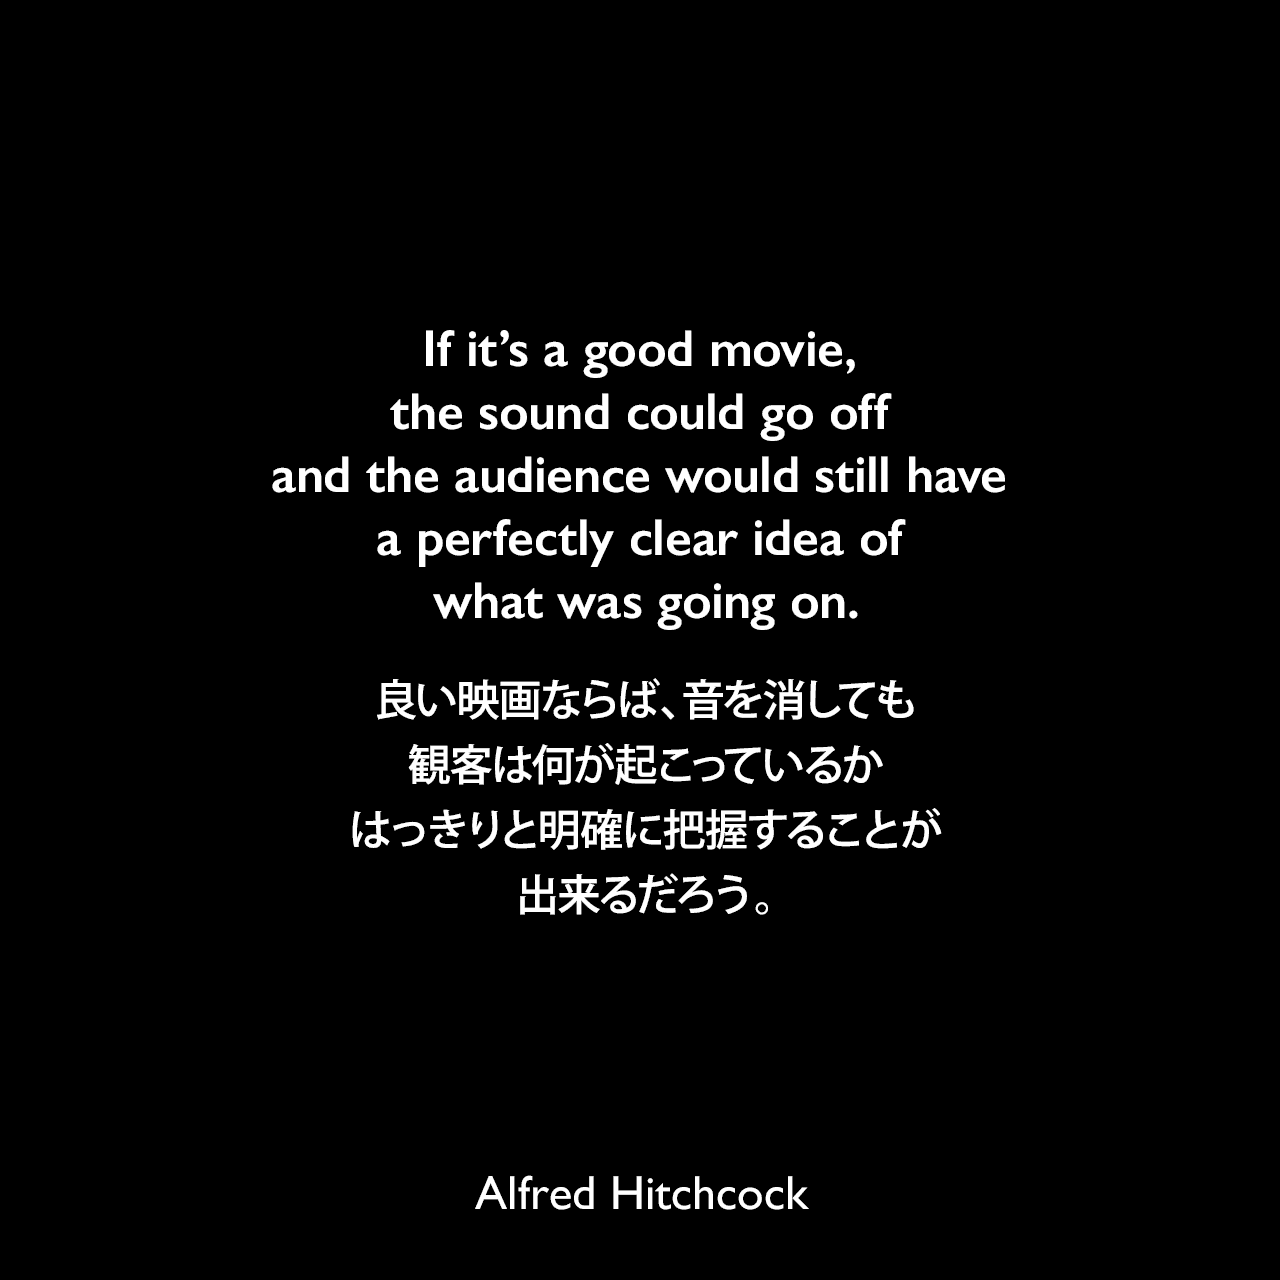 If it’s a good movie, the sound could go off and the audience would still have a perfectly clear idea of what was going on.良い映画ならば、音を消しても観客は何が起こっているかはっきりと明確に把握することが出来るだろう。Alfred Hitchcock